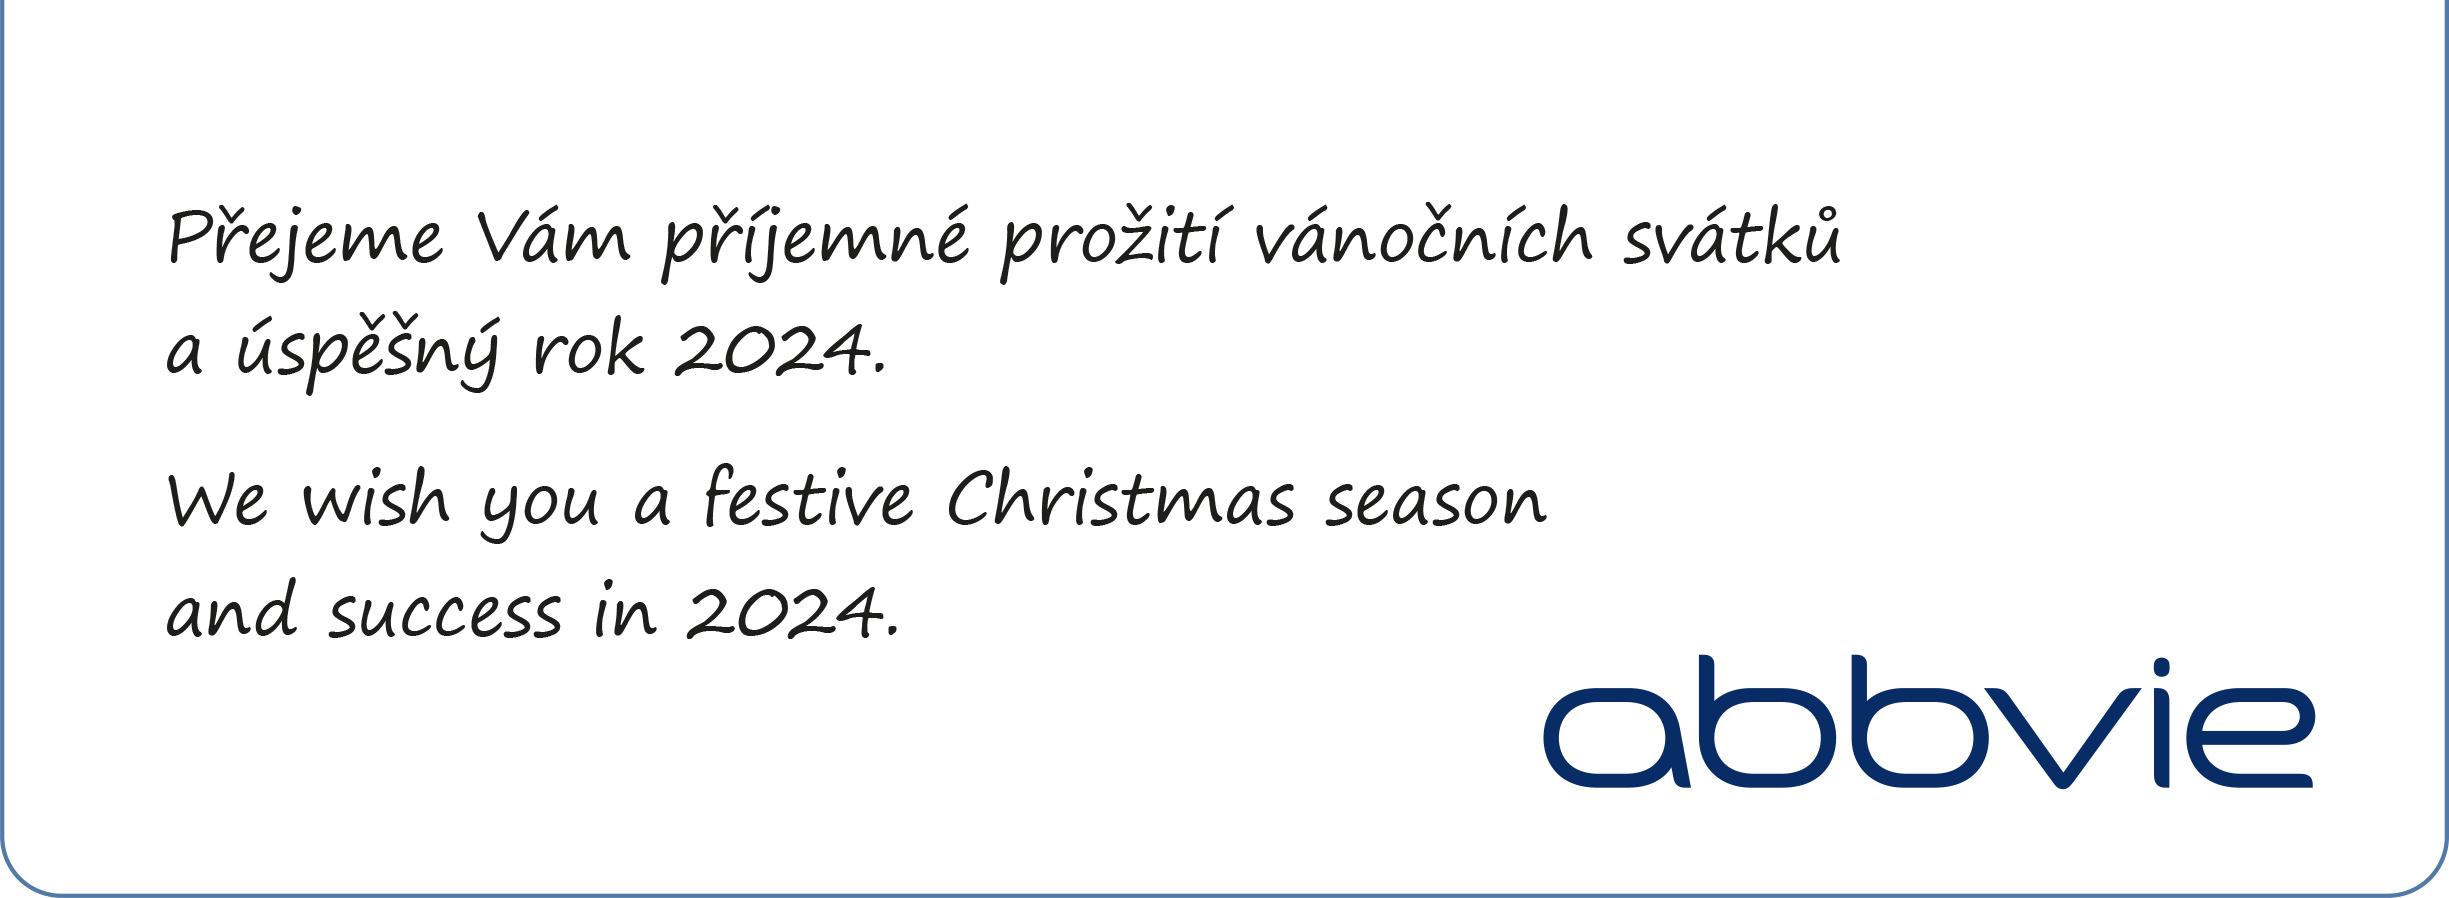 We wish you a festive Christmas season and success in 2024. AbbVie